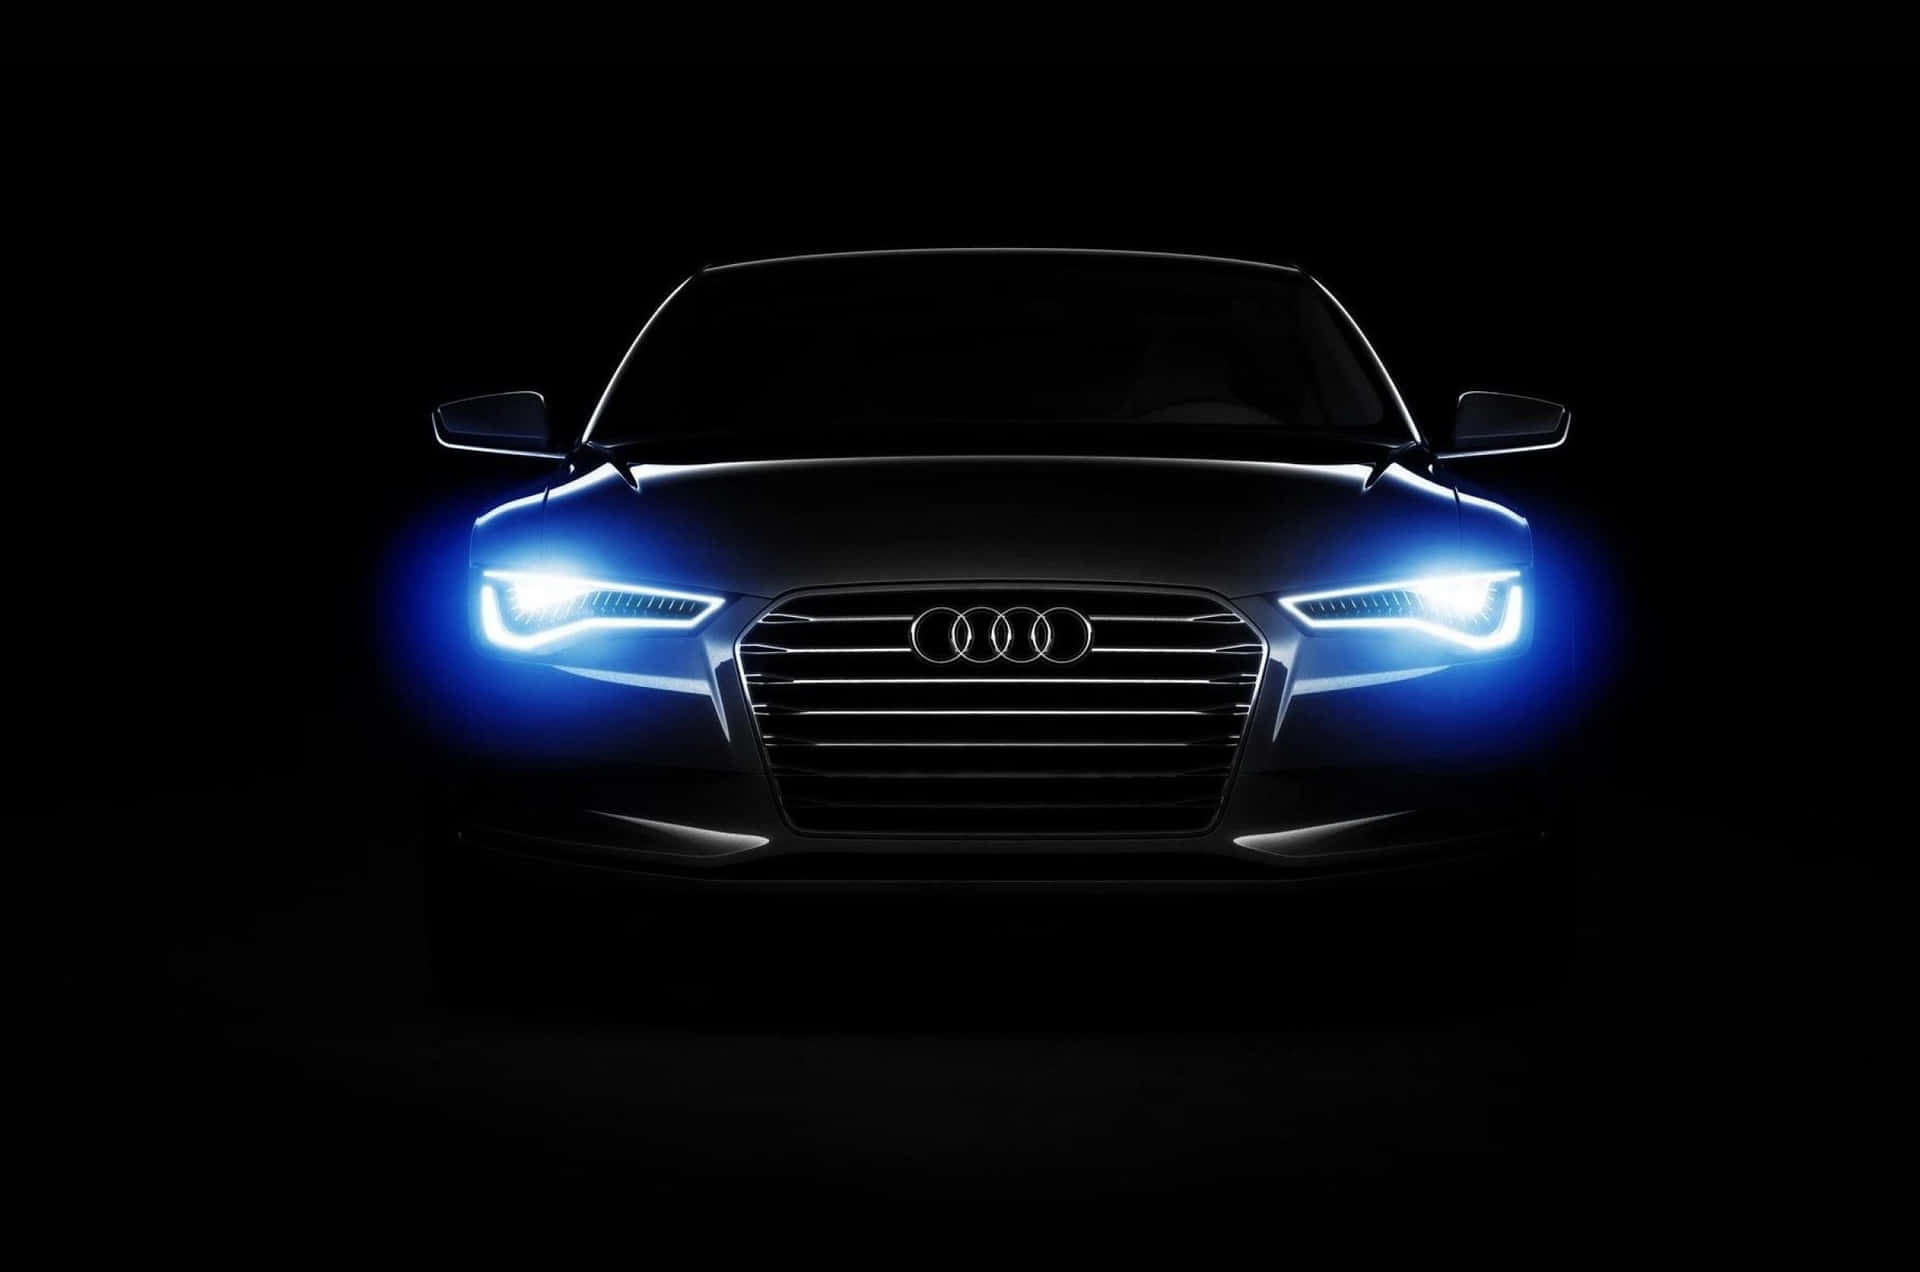 Audi A6 Wallpapers - Top 35 Best Audi A6 Backgrounds